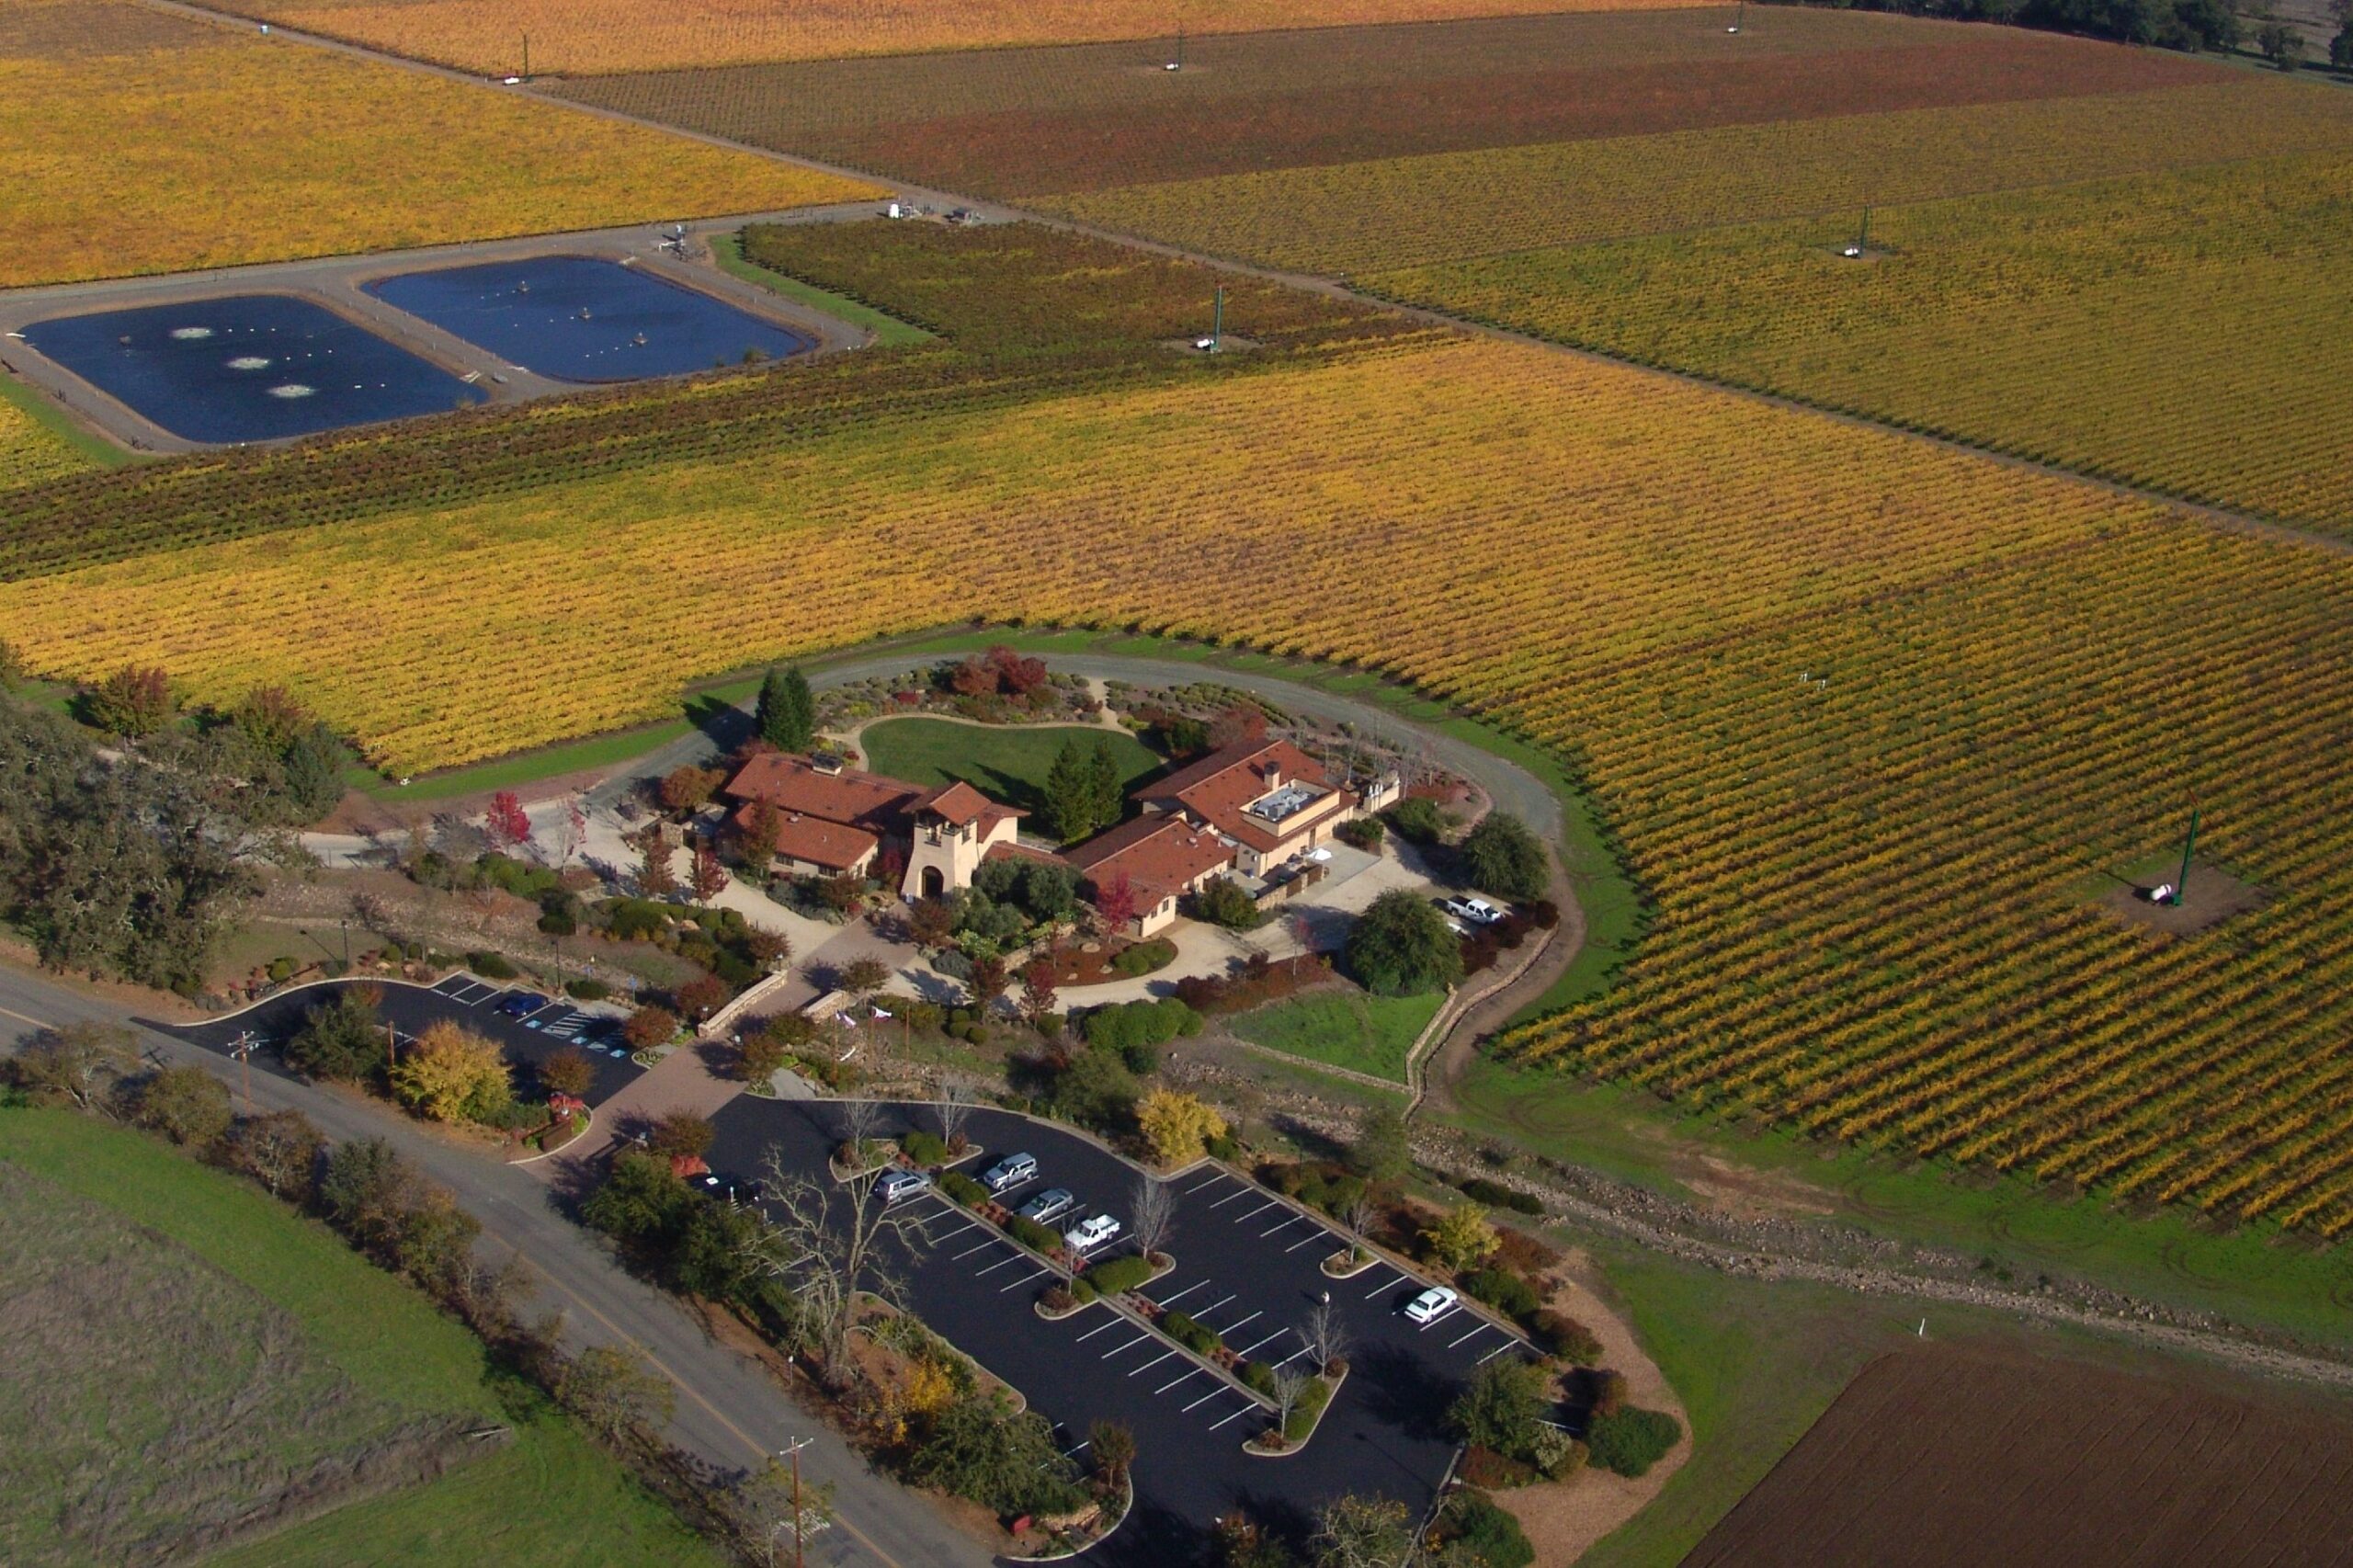 Ariel view of vineyards in the fall and winery sitting amongst them. Kenwood, CA